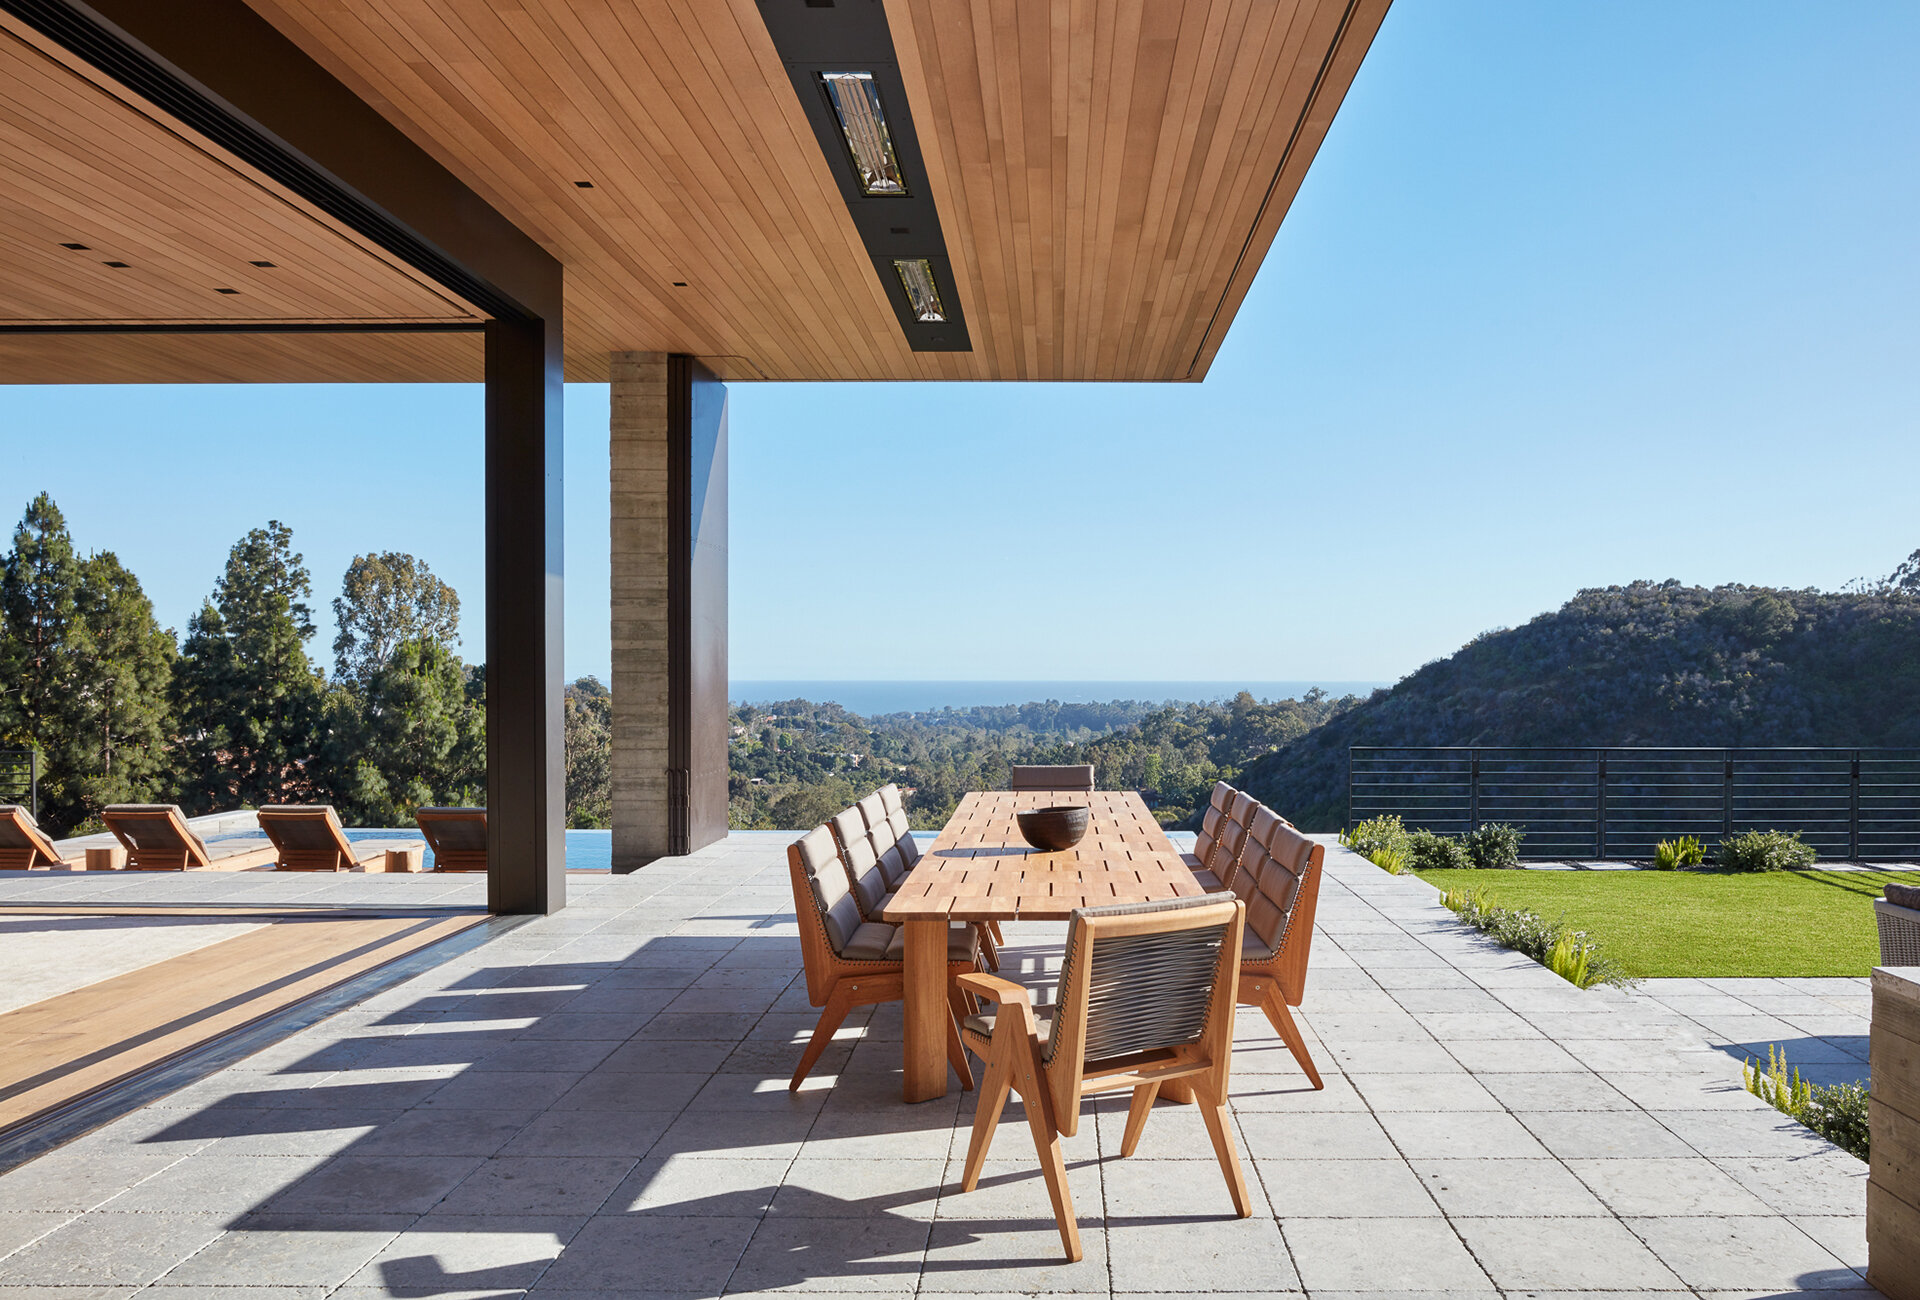  Custom luxury home general contractor built modern private residence in the Pacific Palisades neighborhood of Los Angeles featuring quintessential and iconic views of the ocean with Mid-Century style.  